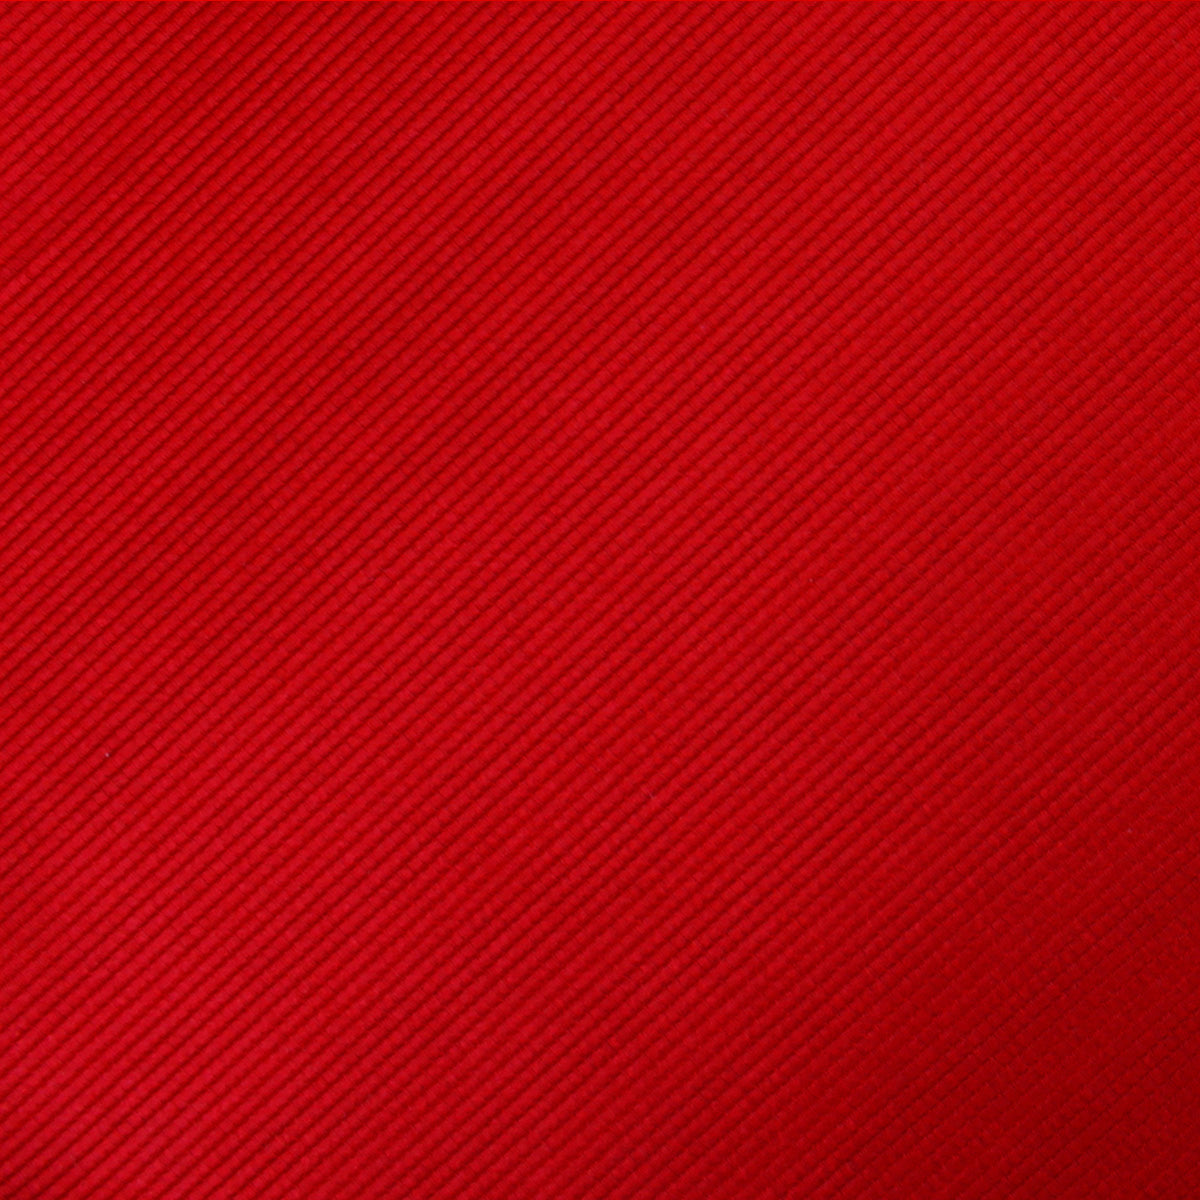 Red Cherry Twill Pocket Square Fabric